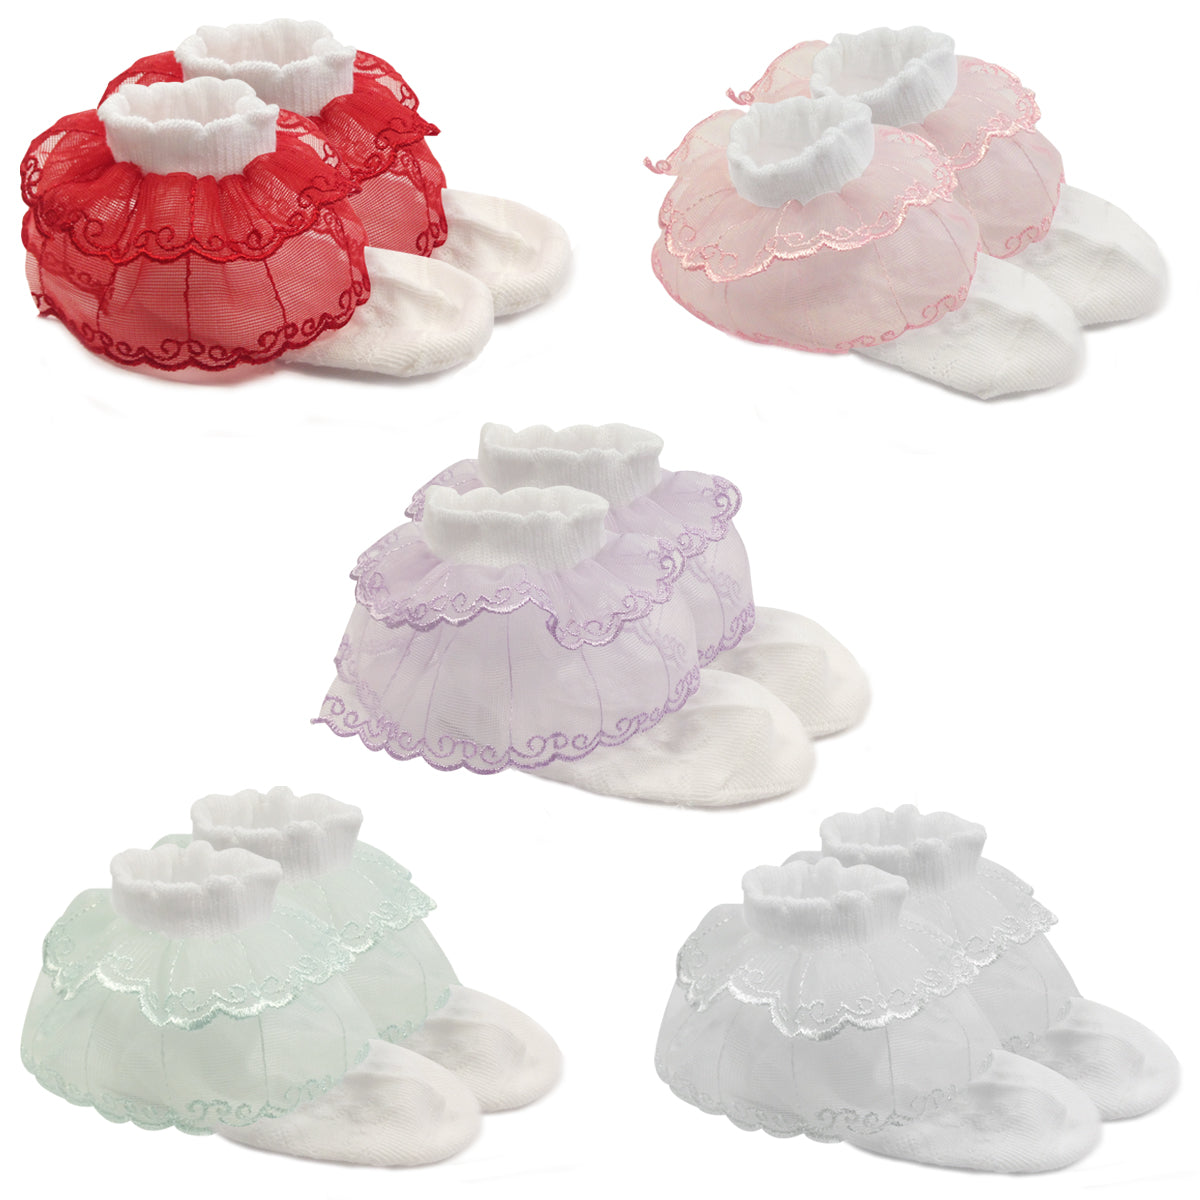 Wrapables Lil Miss Emily Double Layer Lace Ruffle Socks (Set of 5)